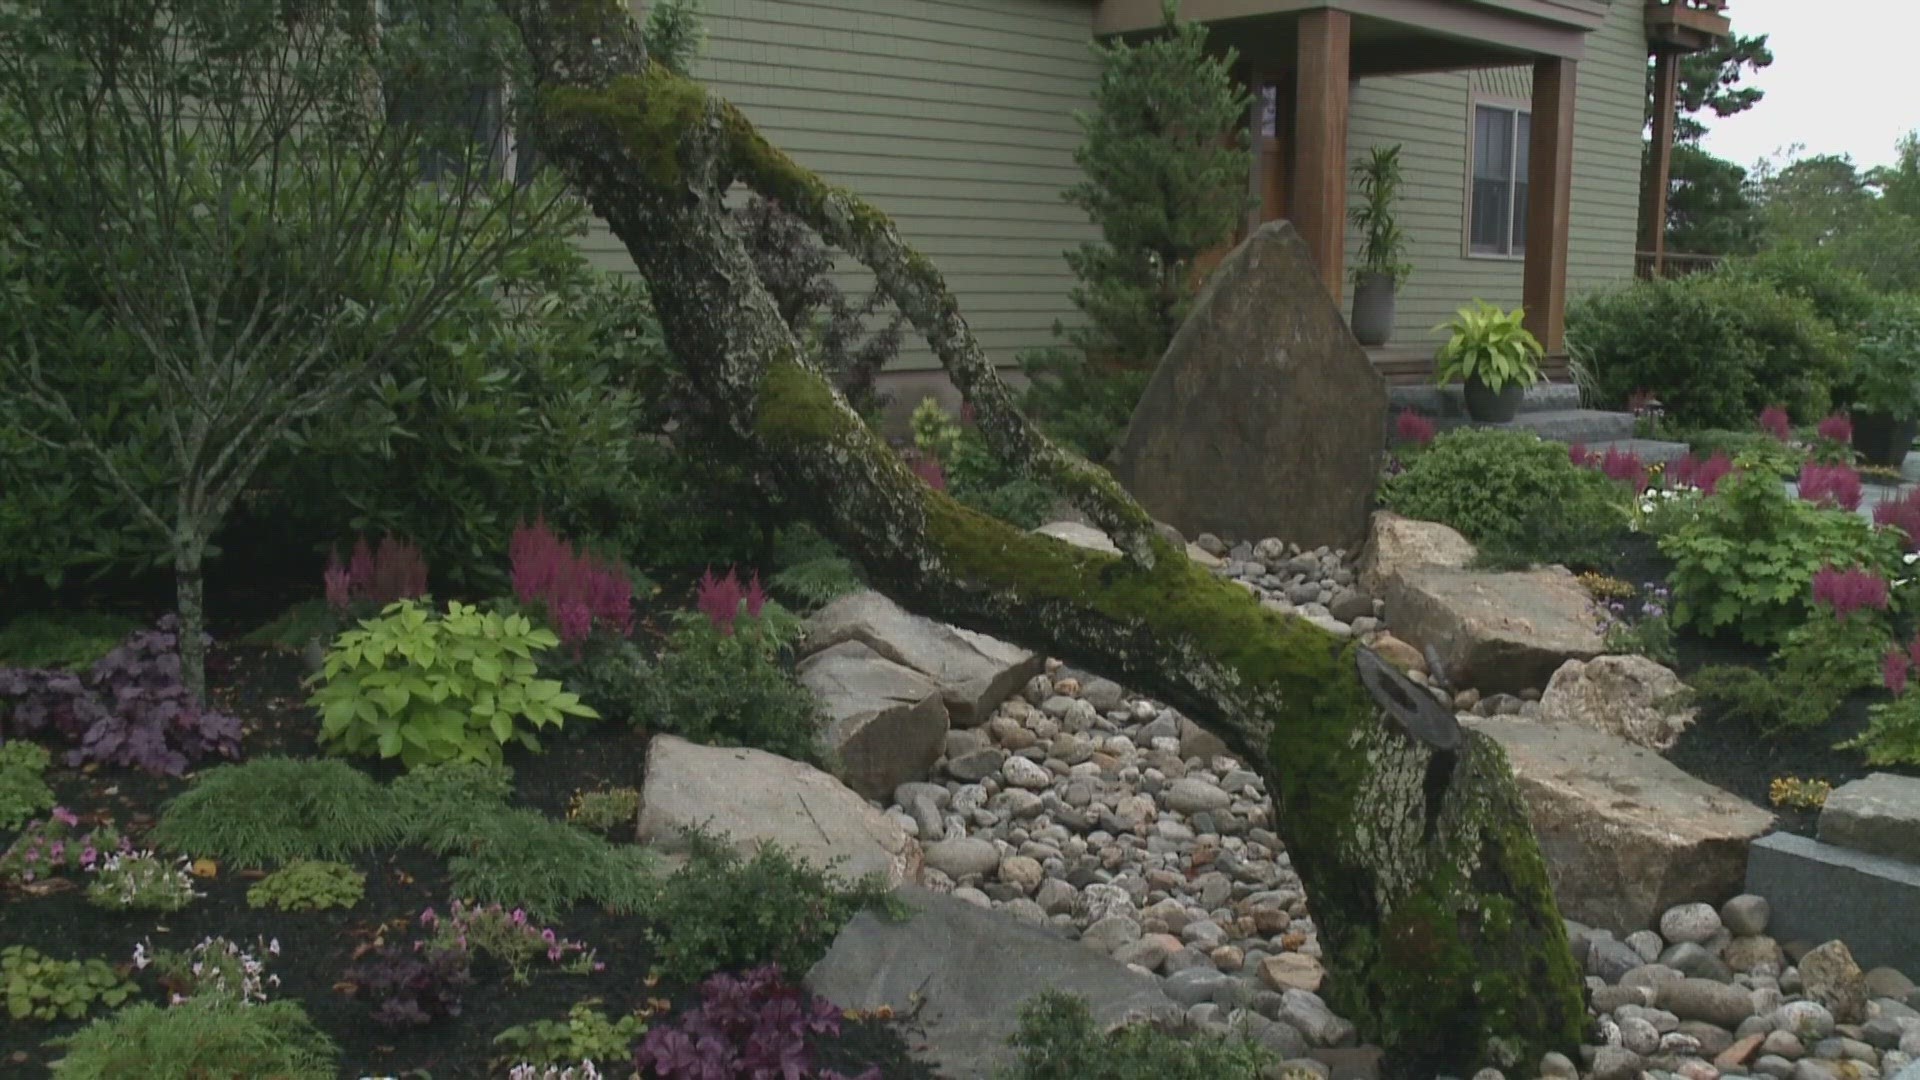 On this episode of Gardening with Gutner, Todd meets with Ted Carter Inspired Landscapes to learn about hardscapes.